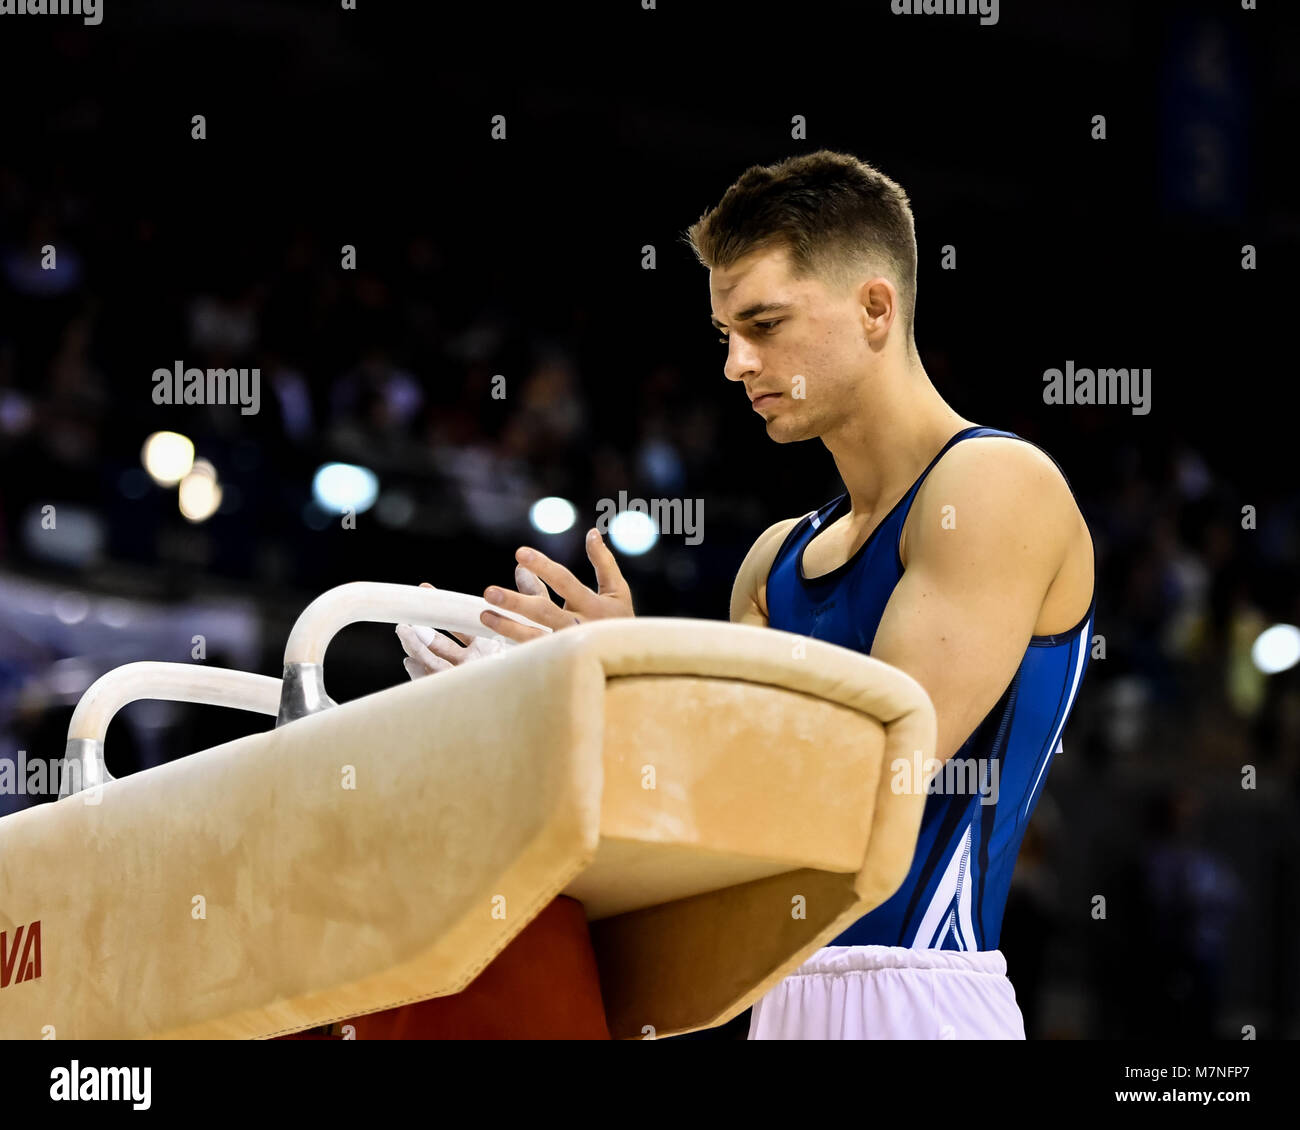 Echo Arena, Liverpool, UK. 11th Mar, 2018. Max Whitlock (MBE) competes on the Pommel Horse during the WAG Senior Apparatus Final/MAG Masters of the 2018 Gymnastics British Championships at Echo Arena on Sunday, 11 March 2018. LIVERPOOL ENGLAND. Credit: Taka G Wu Credit: Taka Wu/Alamy Live News Stock Photo